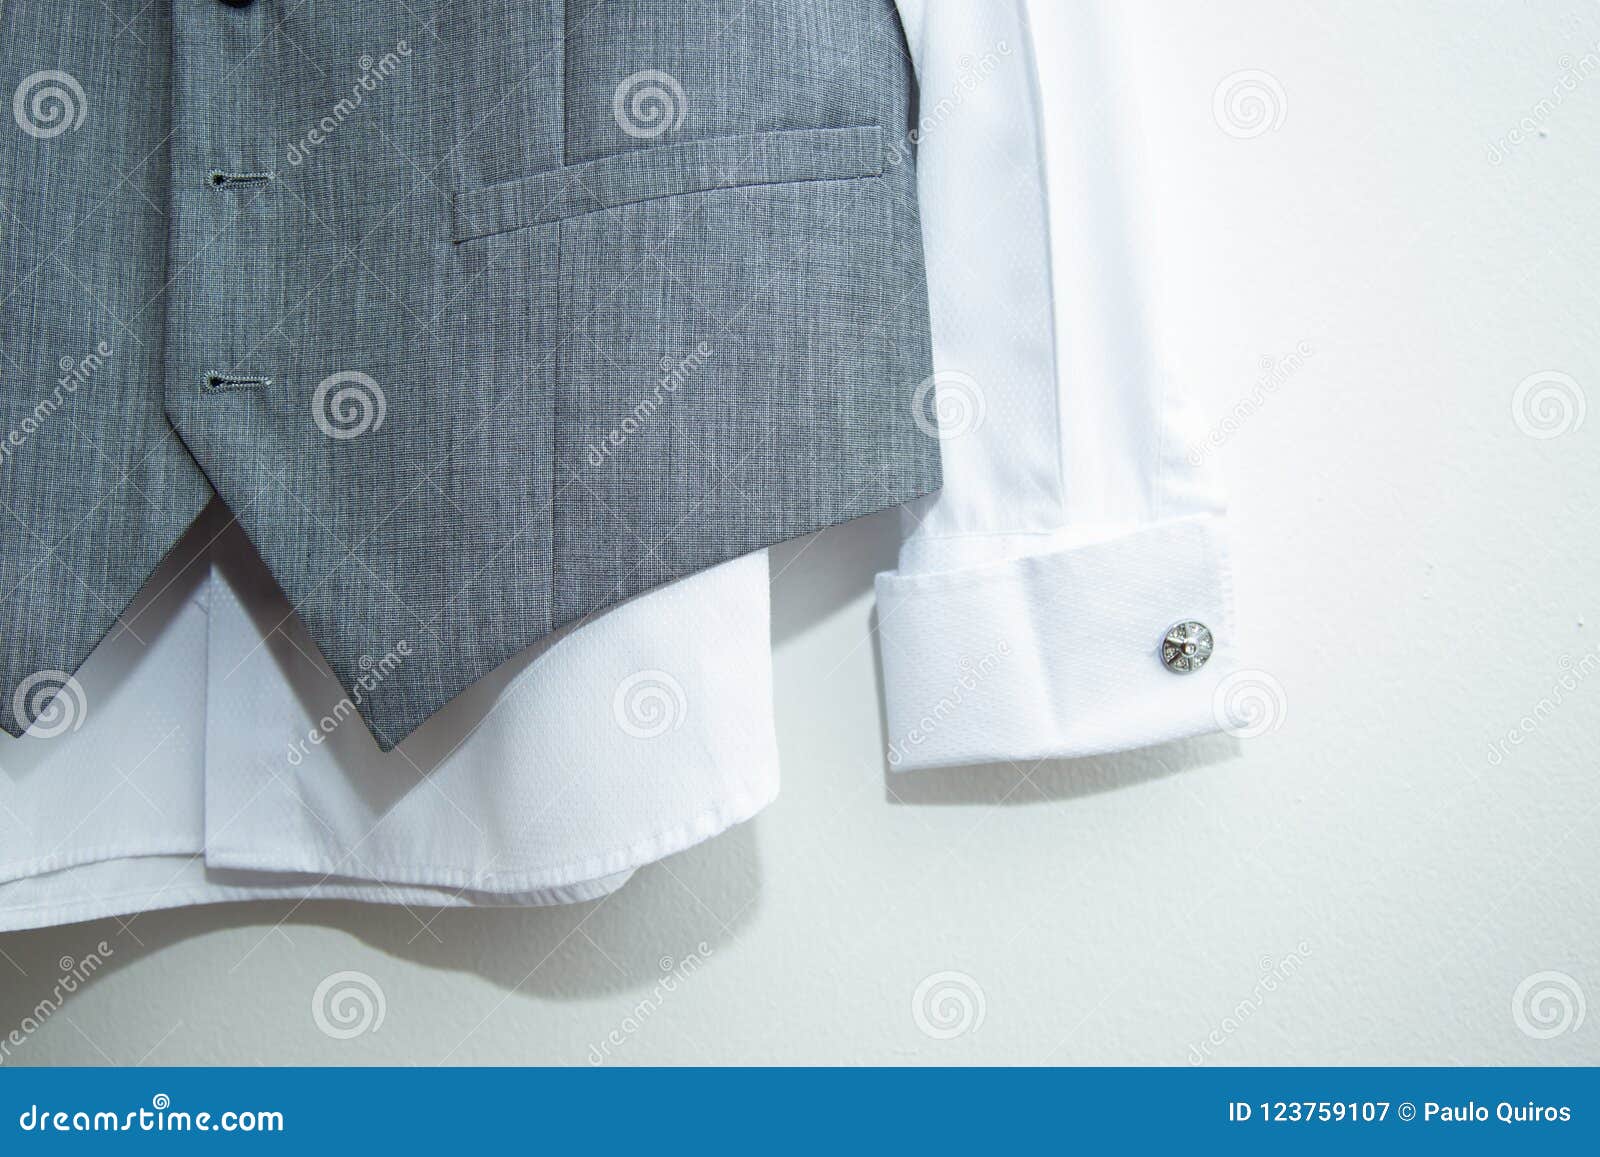 groom`s outfit ready